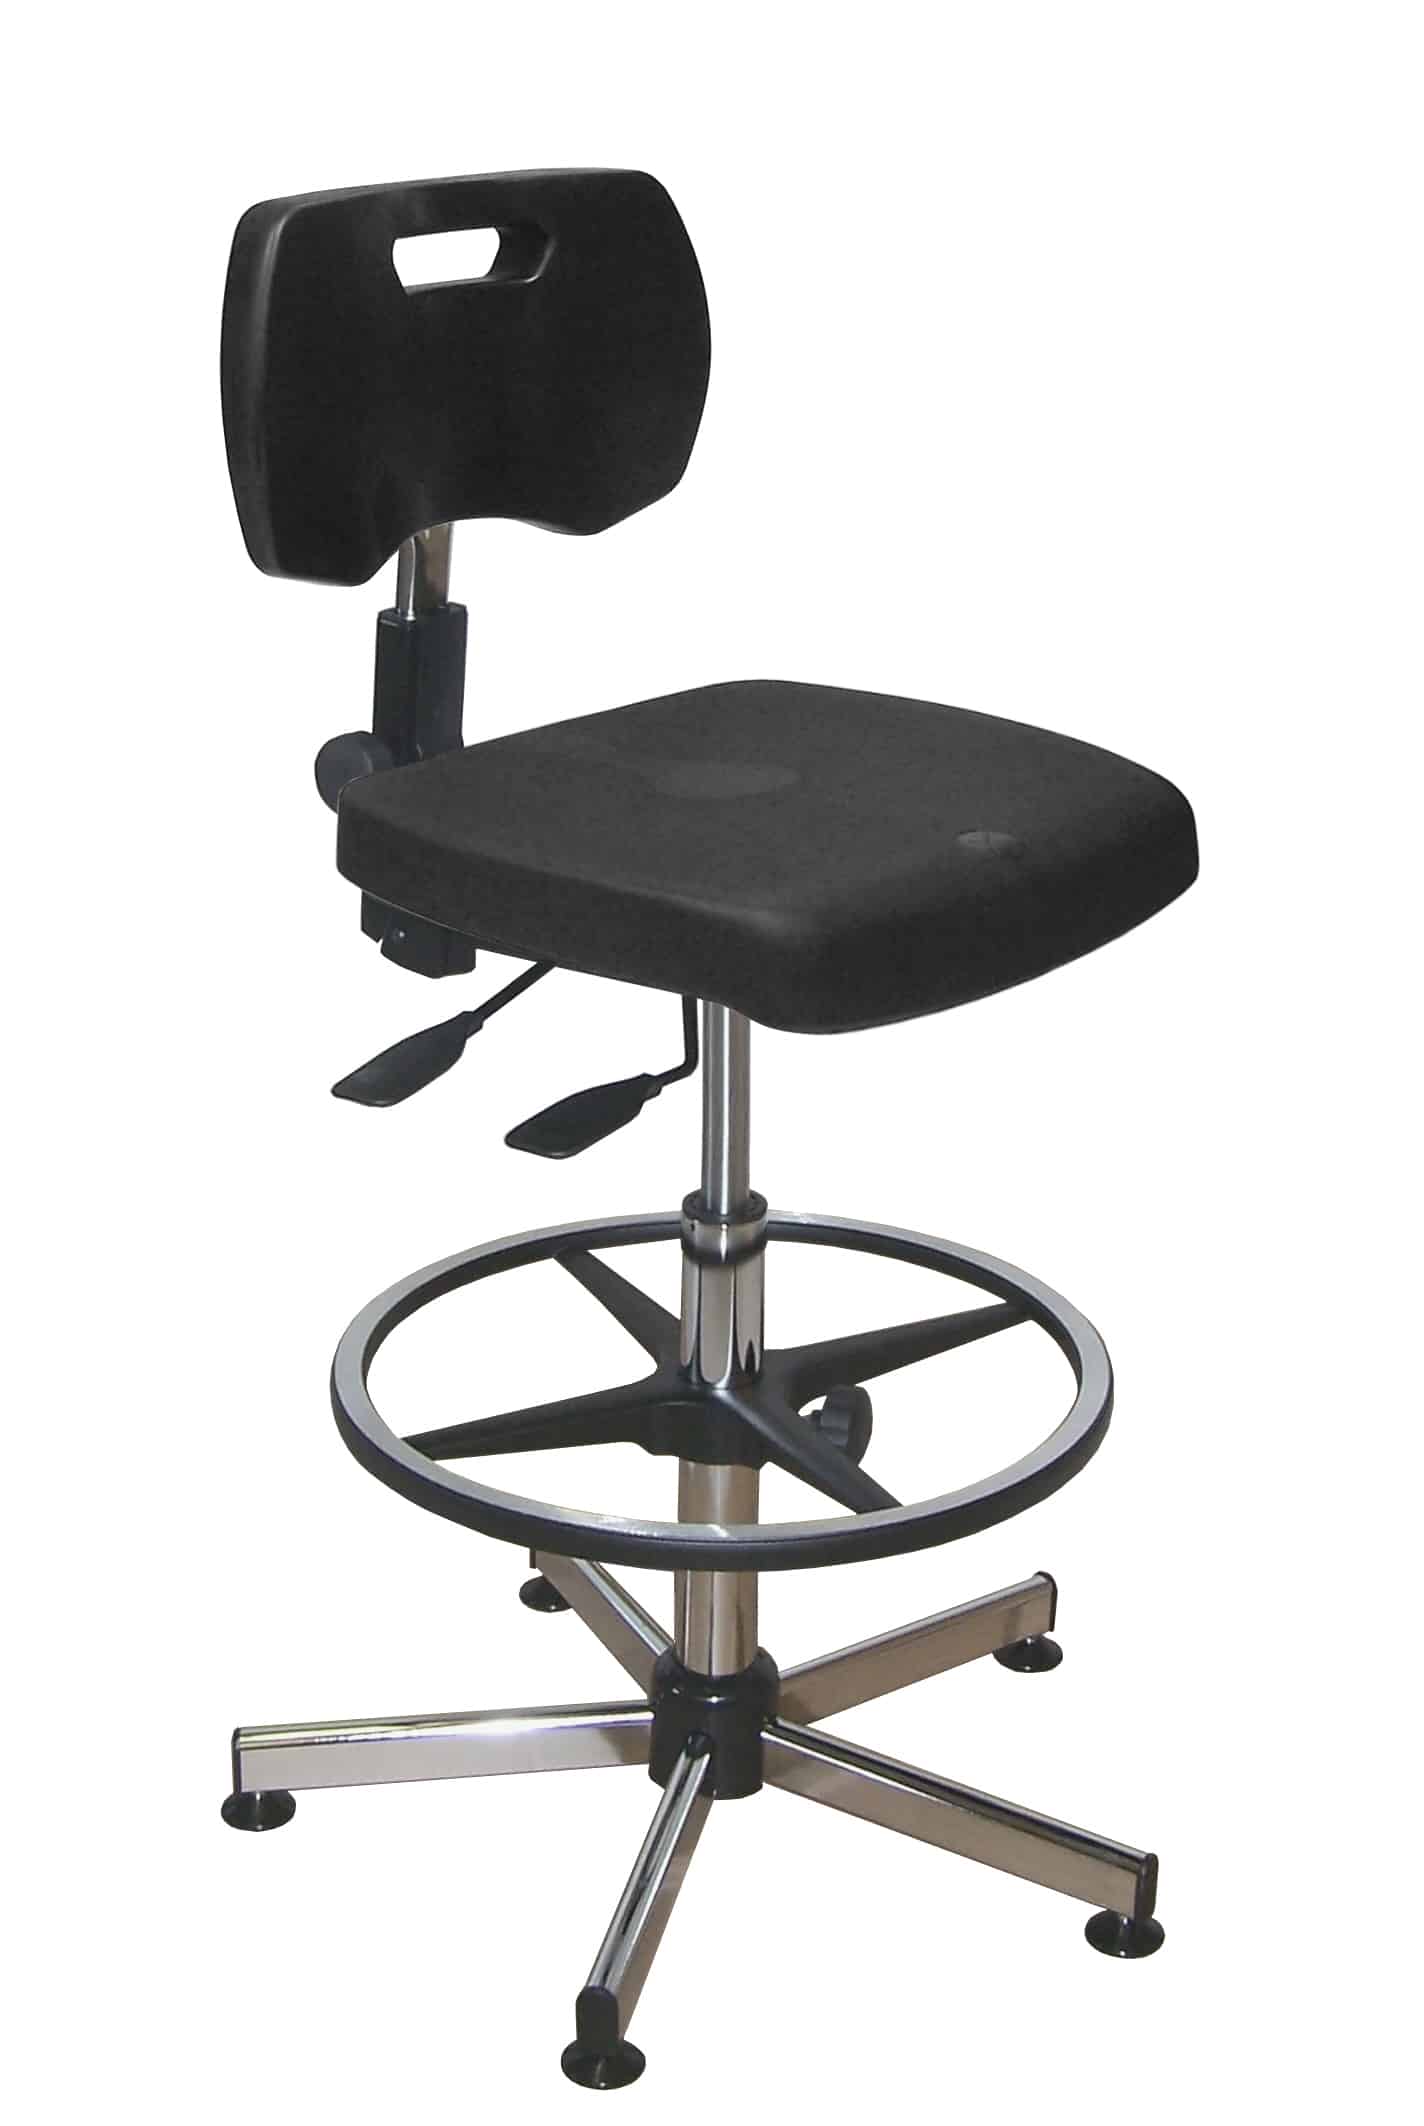 Kango Laboratory Chair – Comfortable Hygienic from RB Scientific